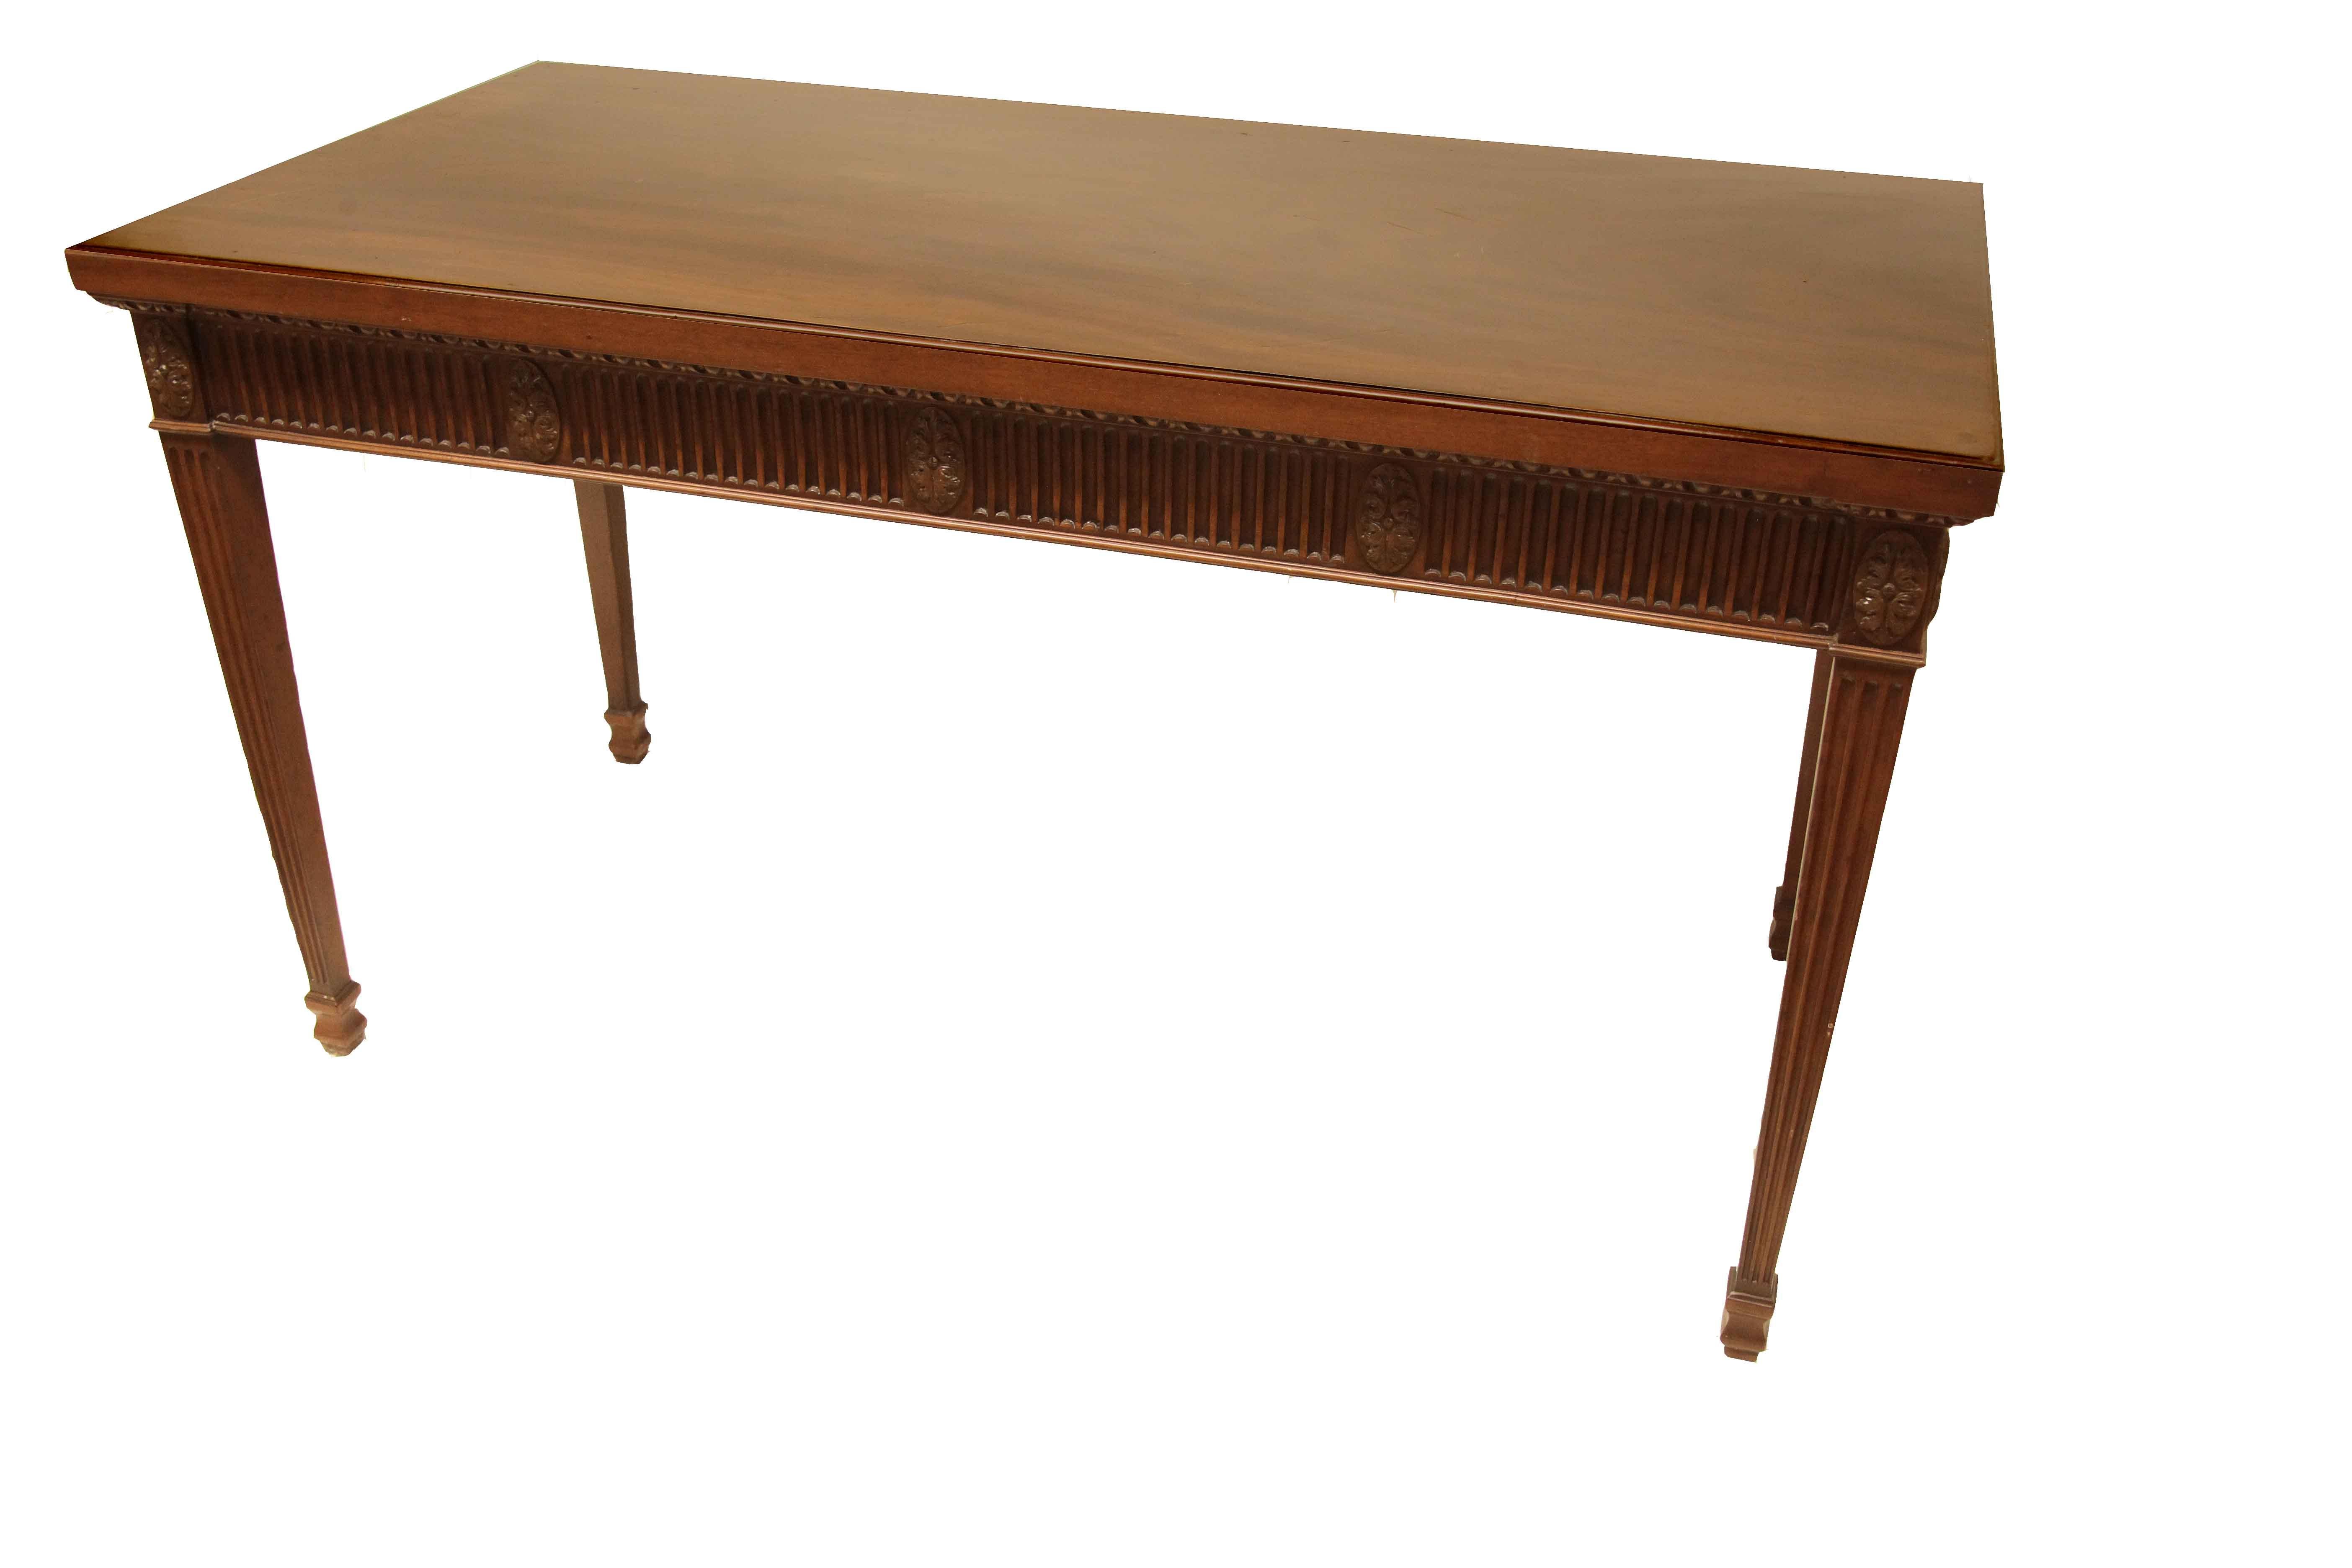 Early 19th Century  English Hepplewhite Console Table For Sale